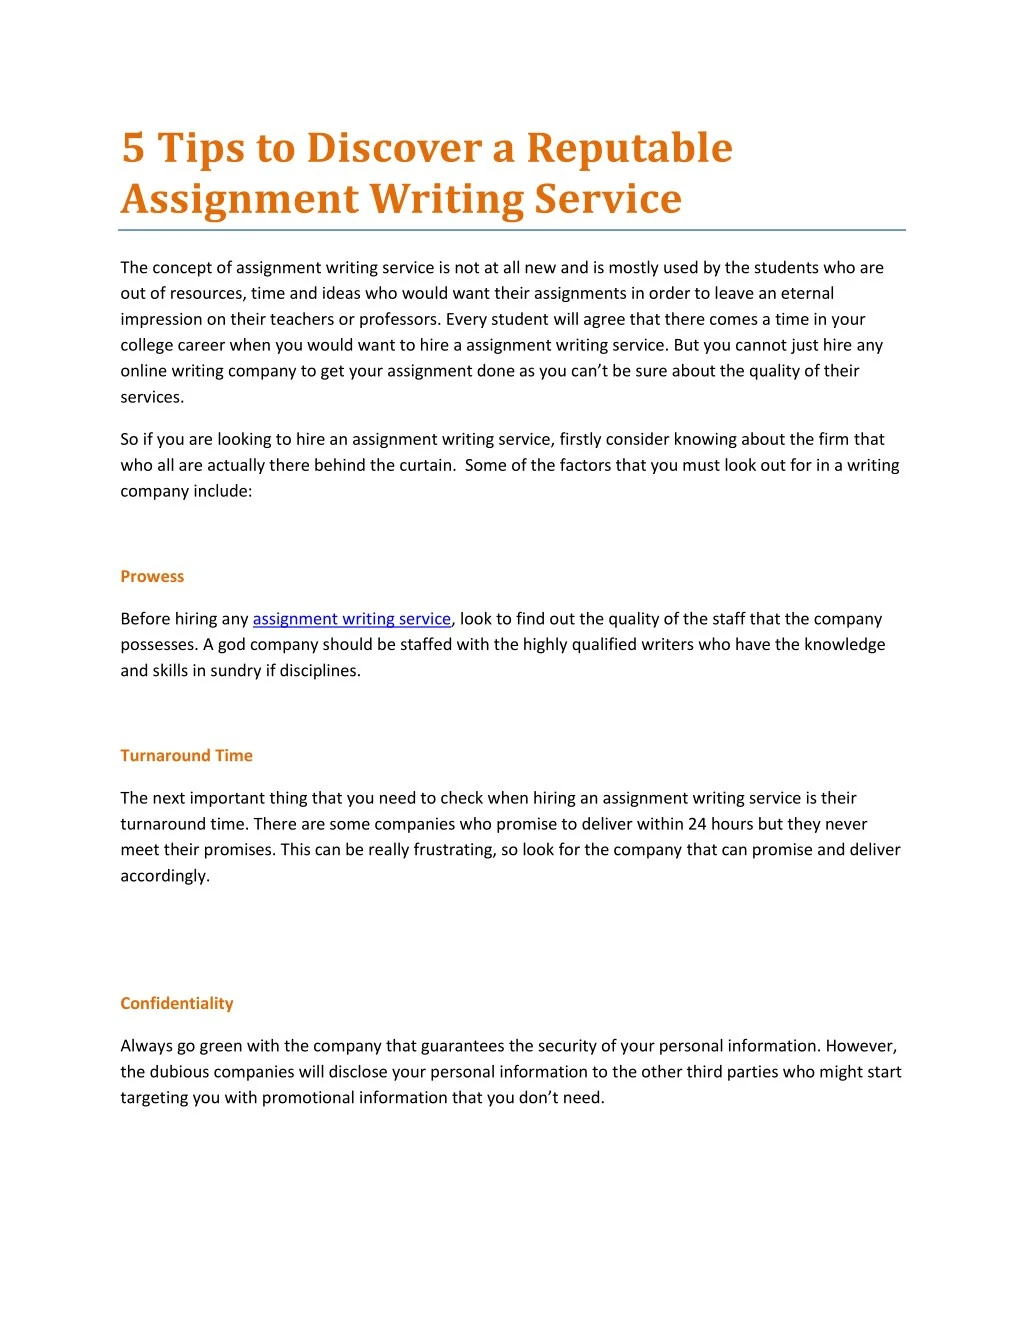 5 tips to discover a reputable assignment writing